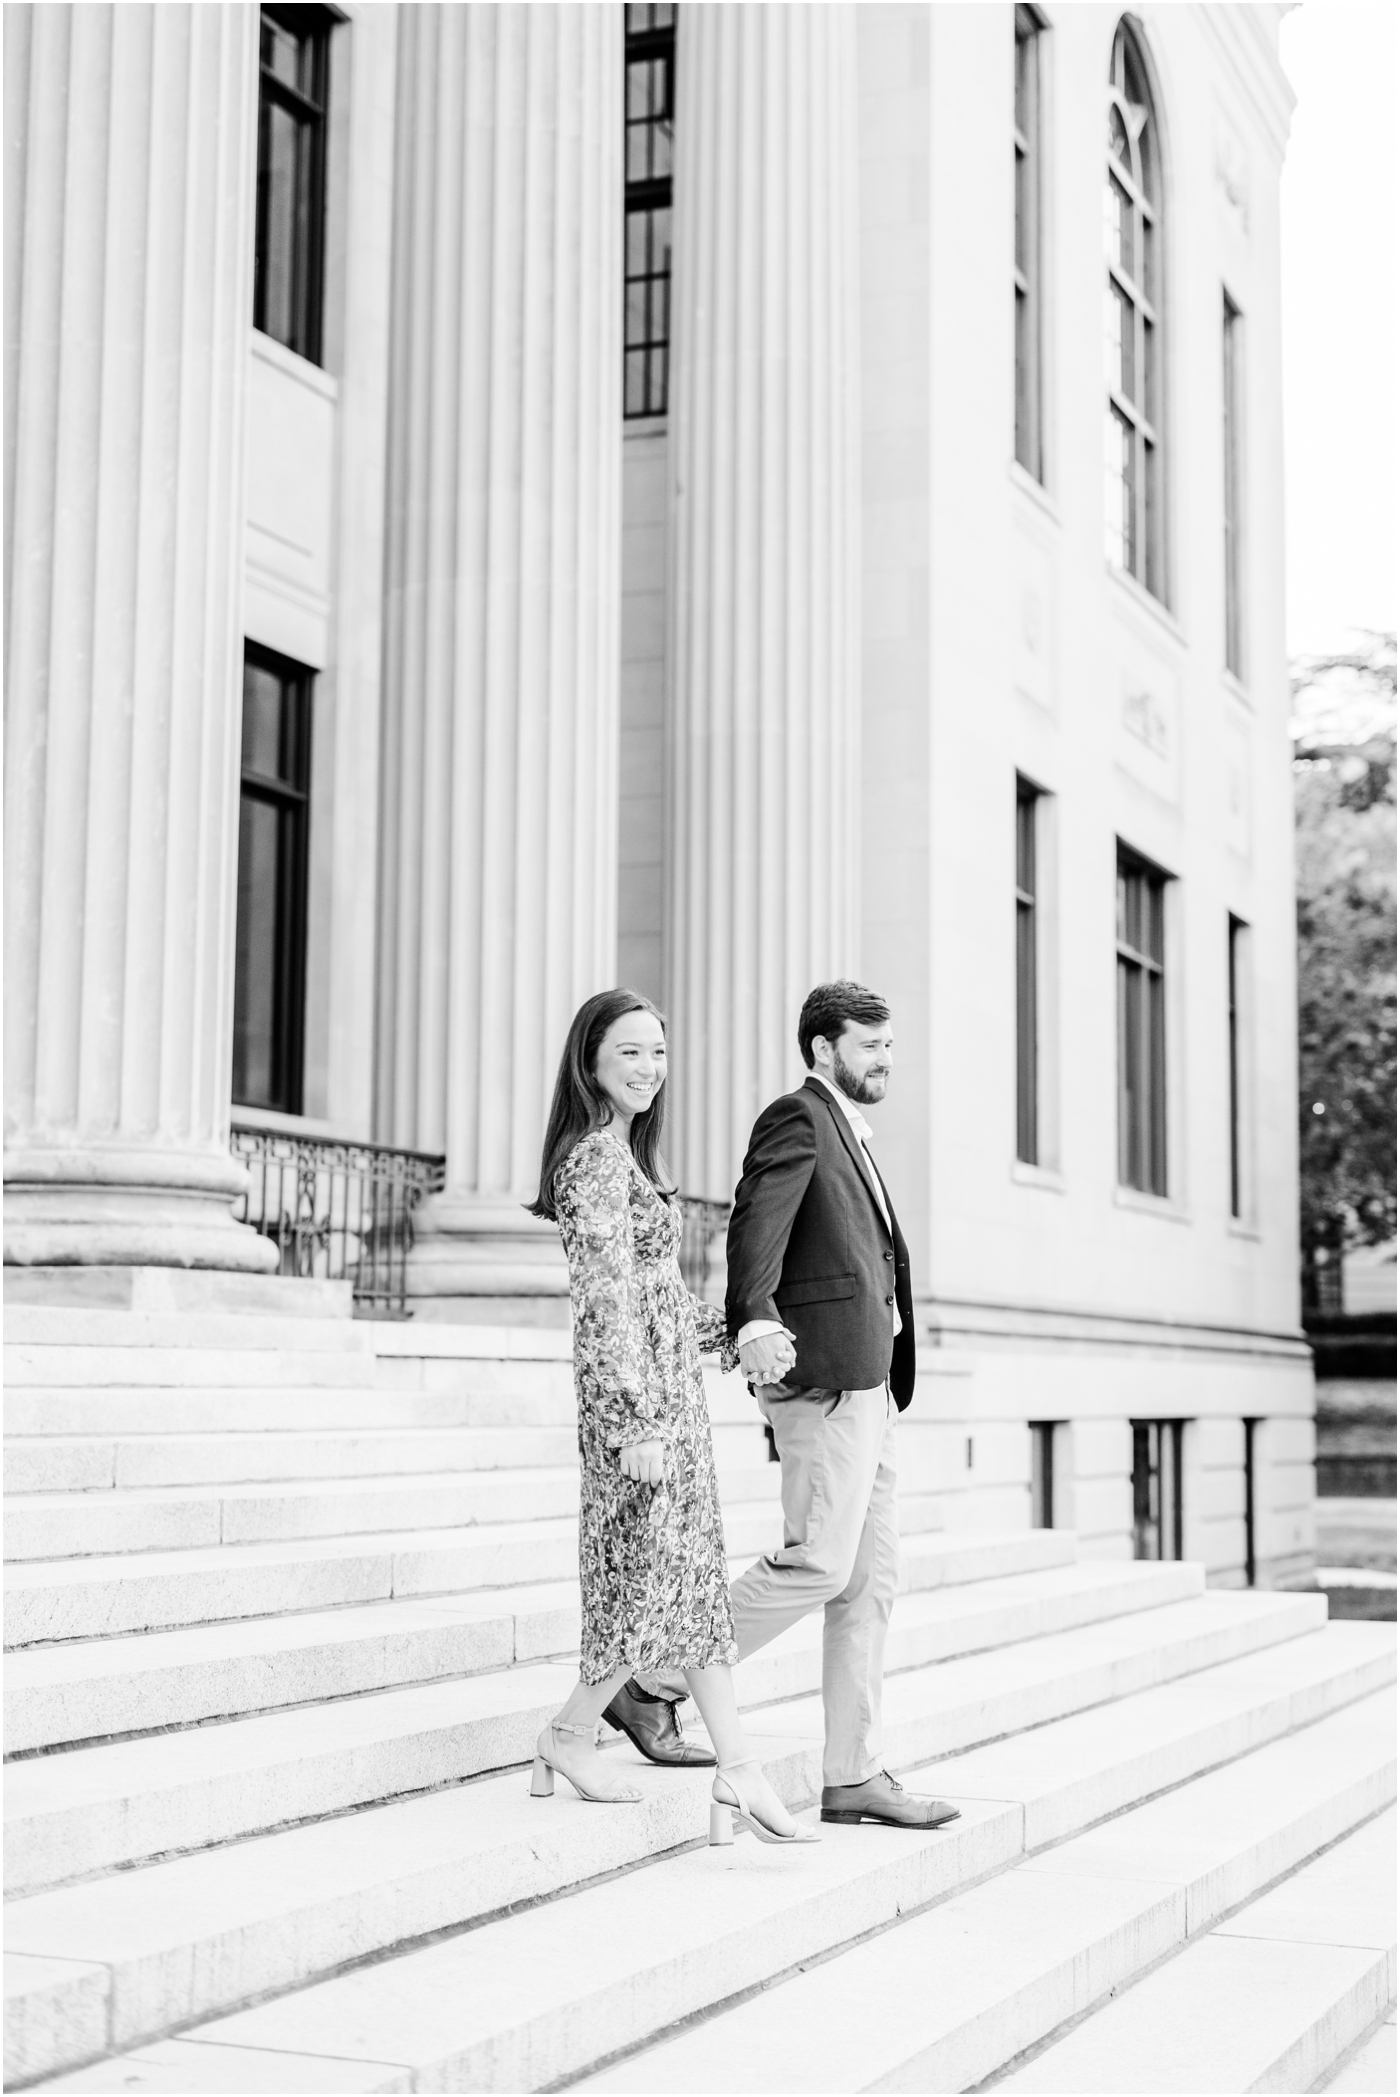 Marshall Park Engagement Session in Charlotte NC